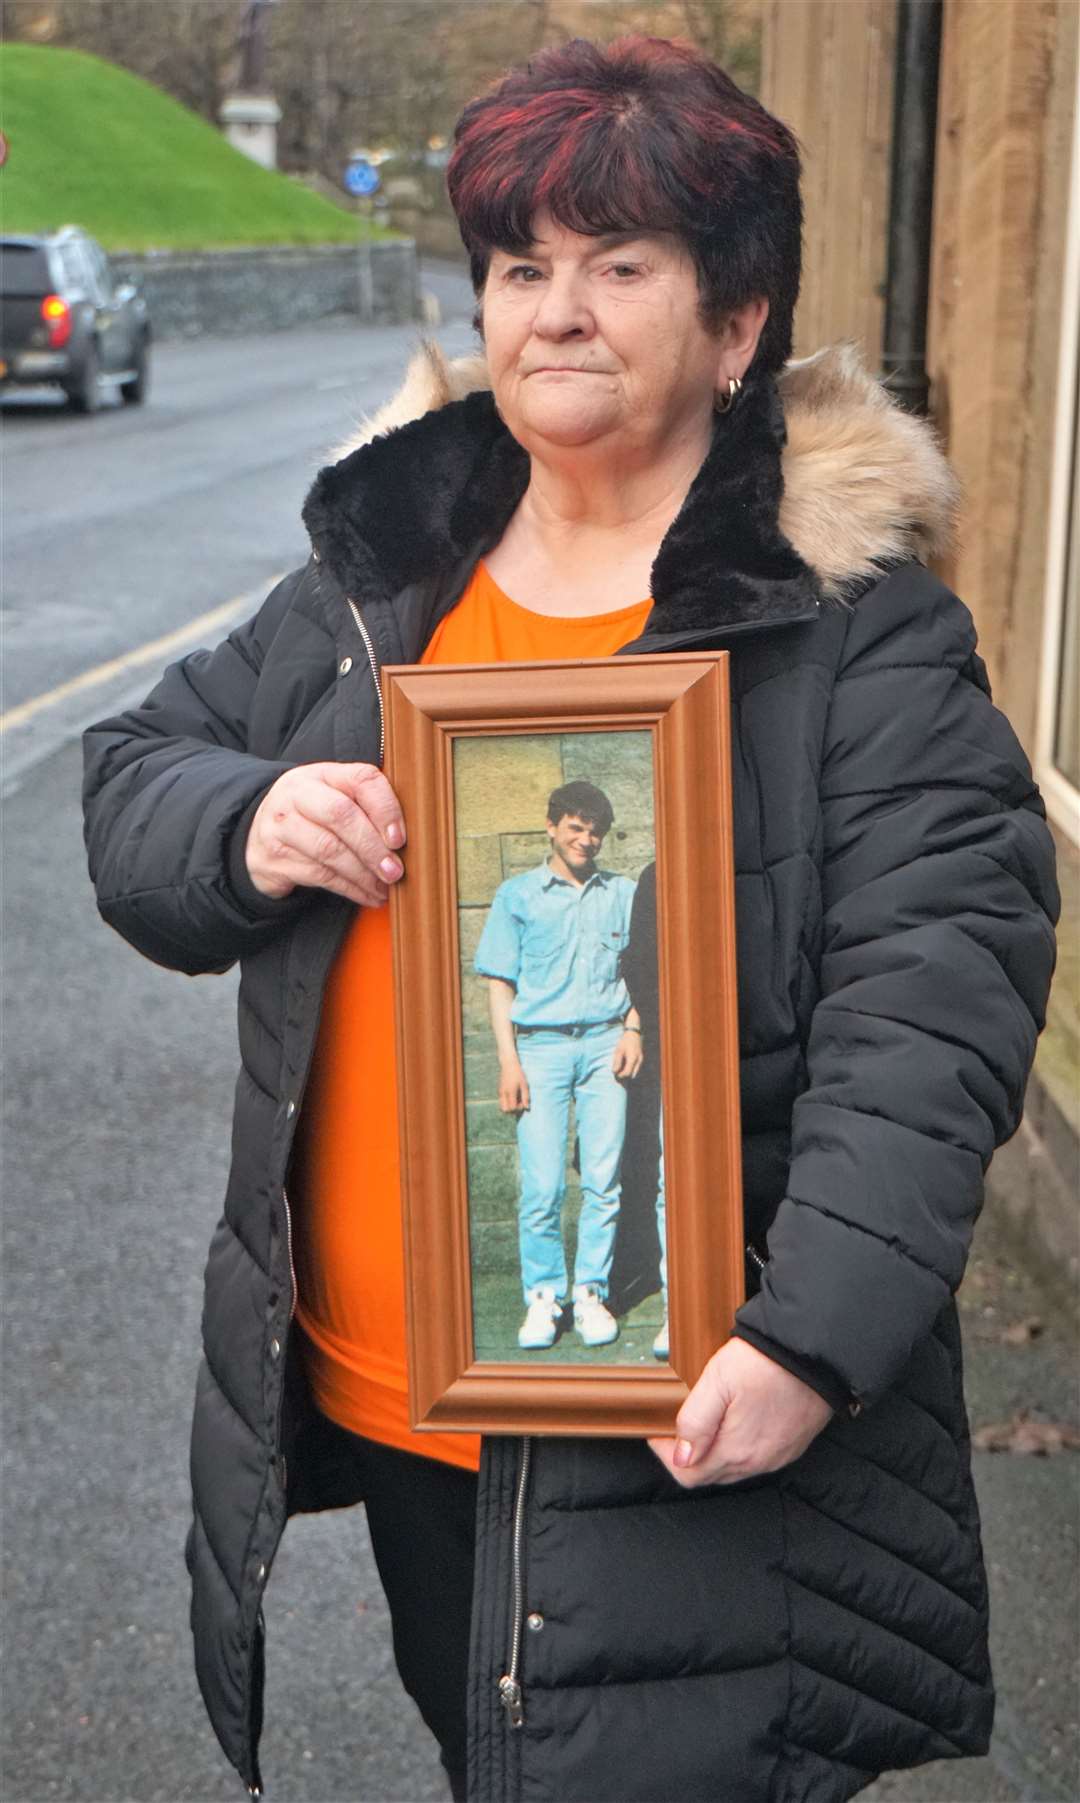 June McLeod holds a portrait of her son Kevin who tragically died in 1997. Picture: DGS